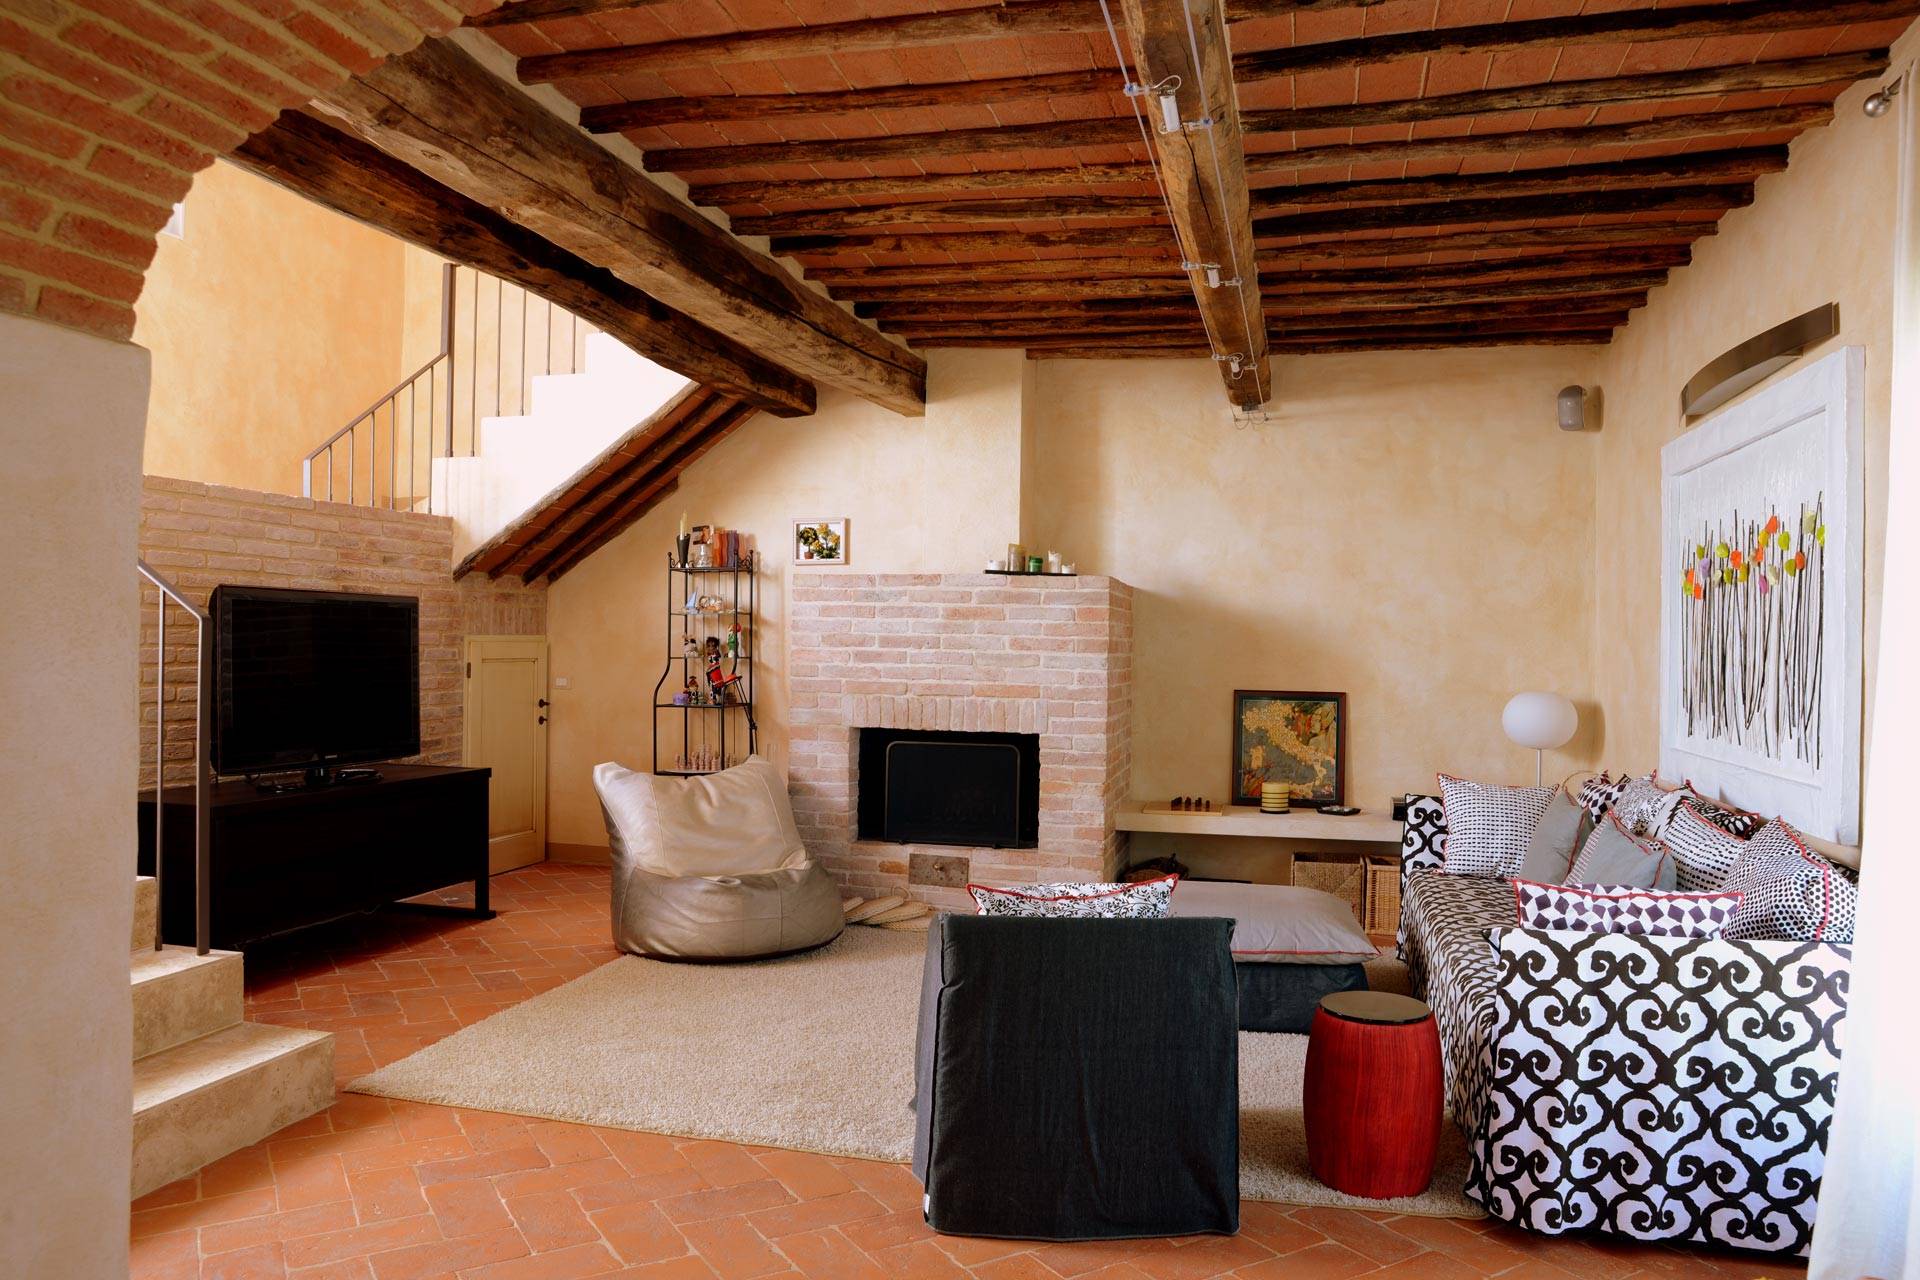 Gorgeous apartment that can host 6 guests, ideal for a relaxing holiday while discovering Tuscany's art and beautiful countryside. The apartment, 